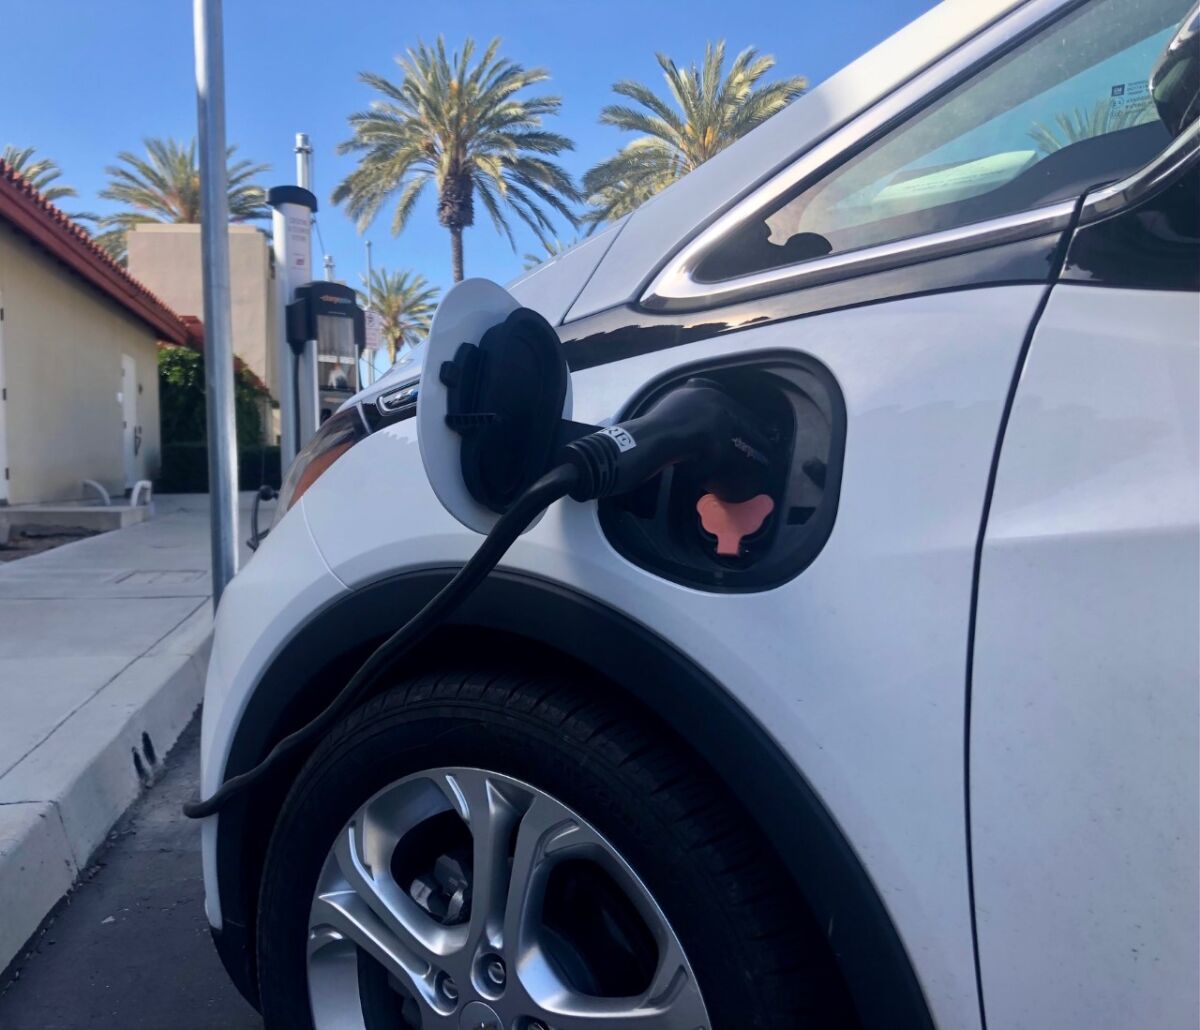 San Diego wants to work with a vendor to install electric vehicle chargers for the public in more than 400 city parking lots.